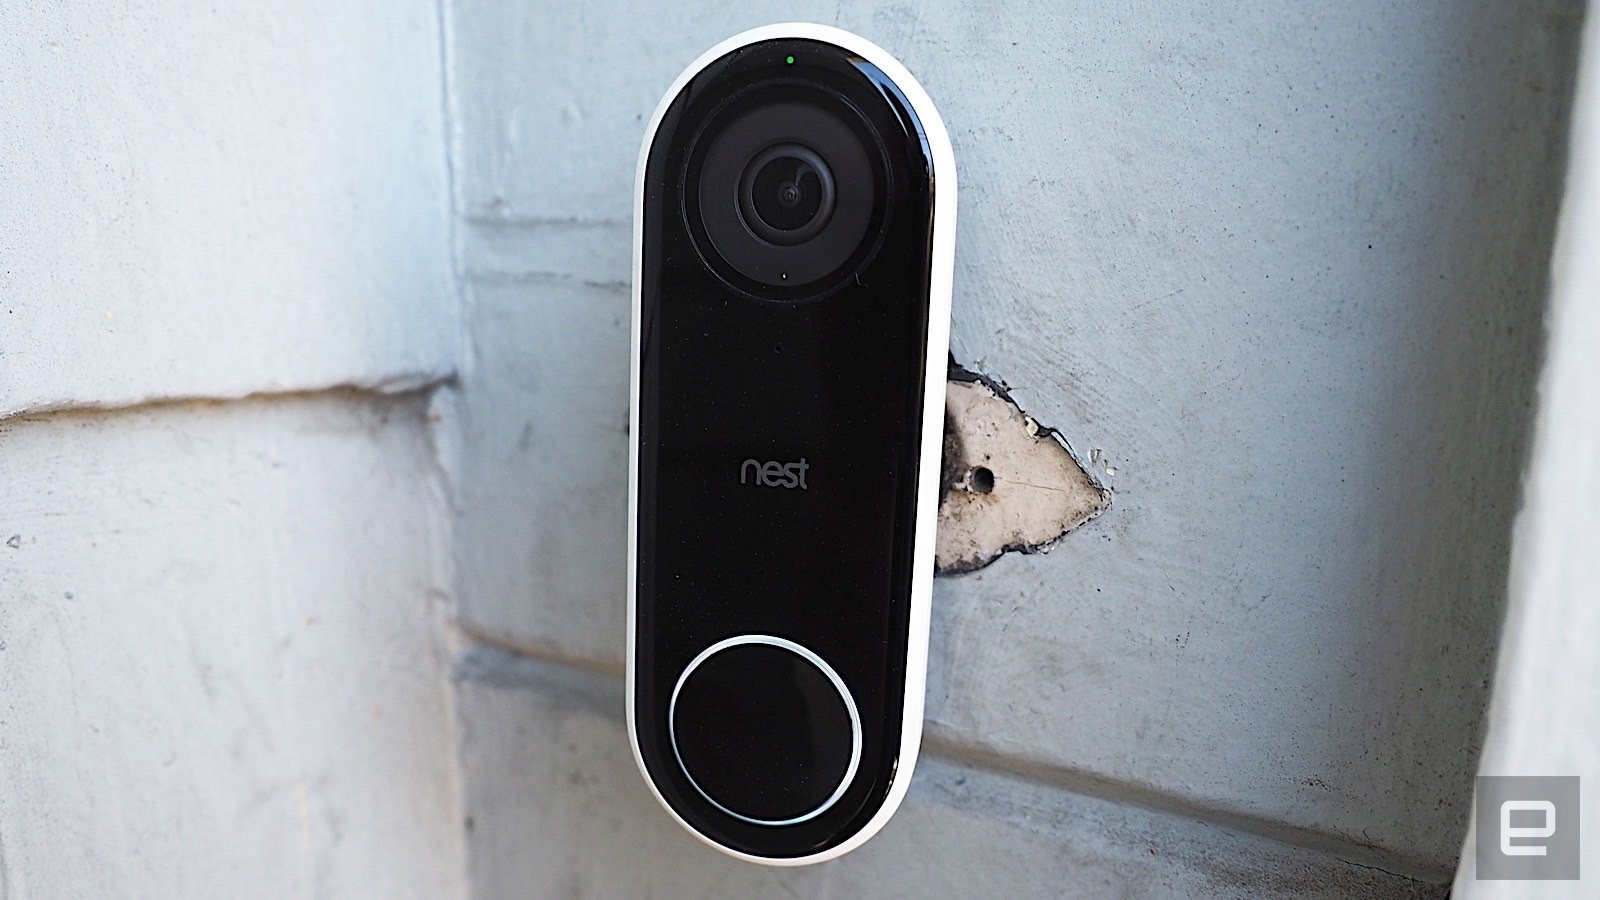 Google's Nest doorbell knows when your packages arrive | DeviceDaily.com